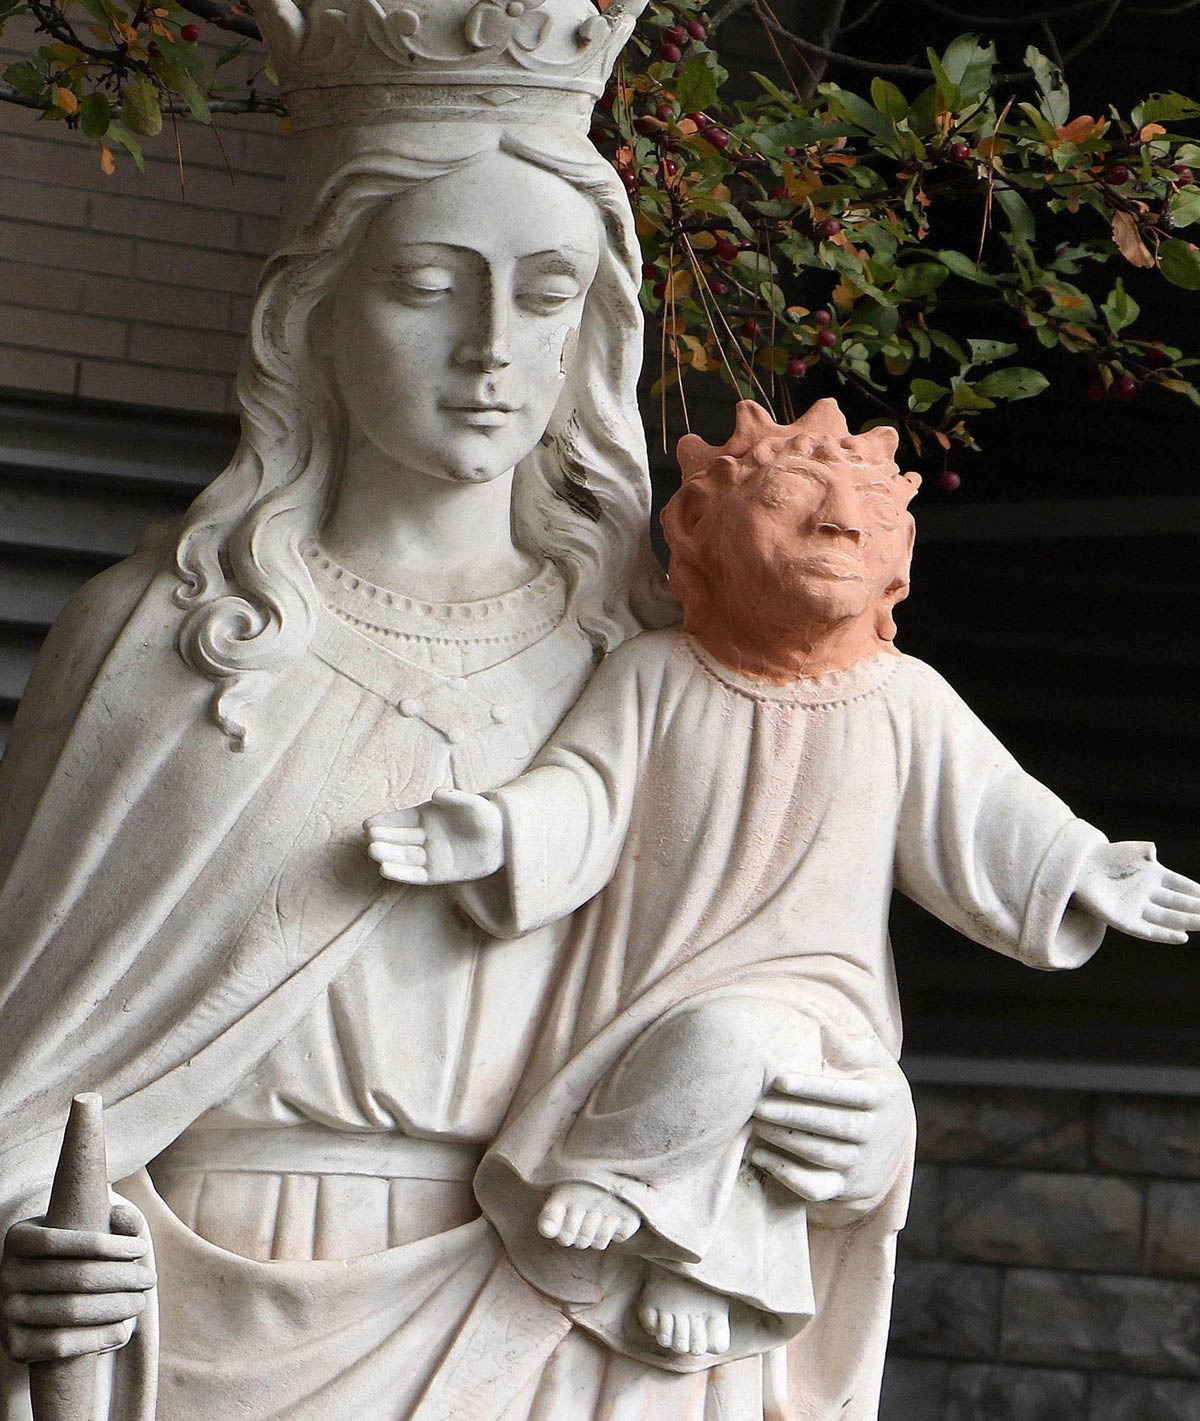 This re-sculpted head of baby Jesus